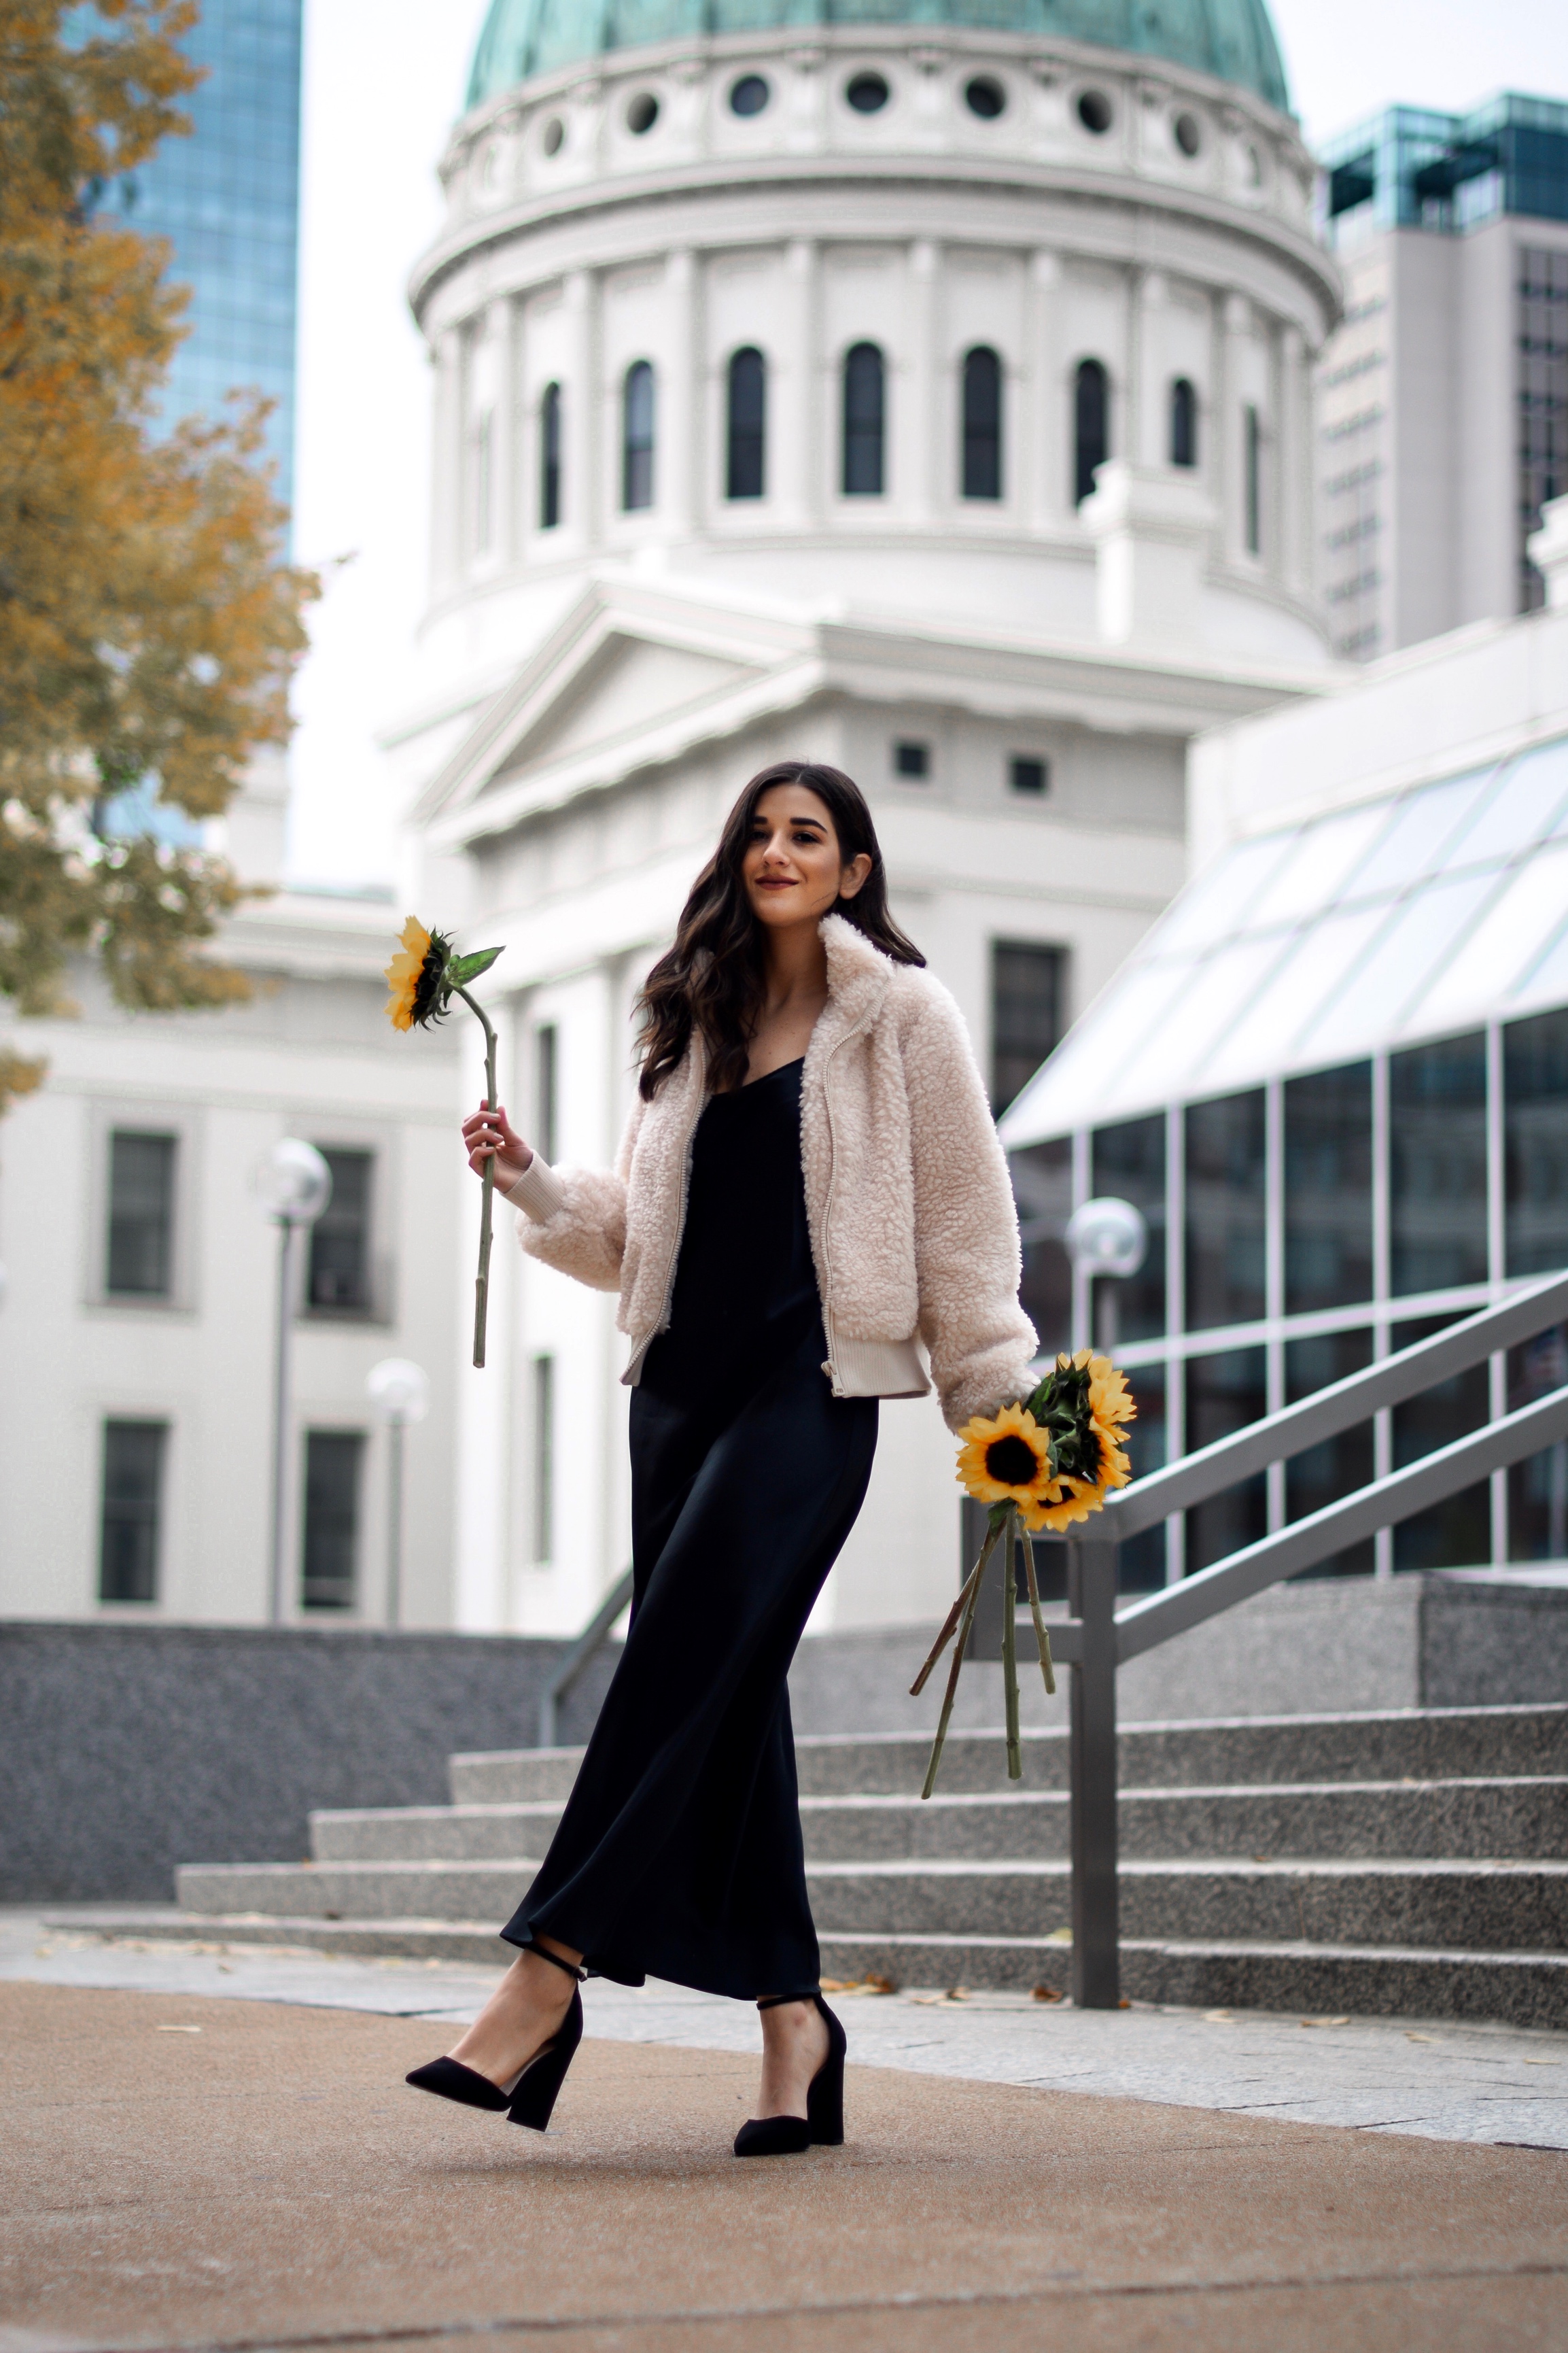 The 10 Most Frustrating Parts Of Brand Collabs Long Black Slip Dress Shearling Jacket Esther Santer Fashion Blog NYC Street Style Blogger Outfit OOTD Trendy Shopping St. Louis Photoshoot Hometown  Downtown Saint Louis Sunflowers Yellow Flowers Heels.jpg